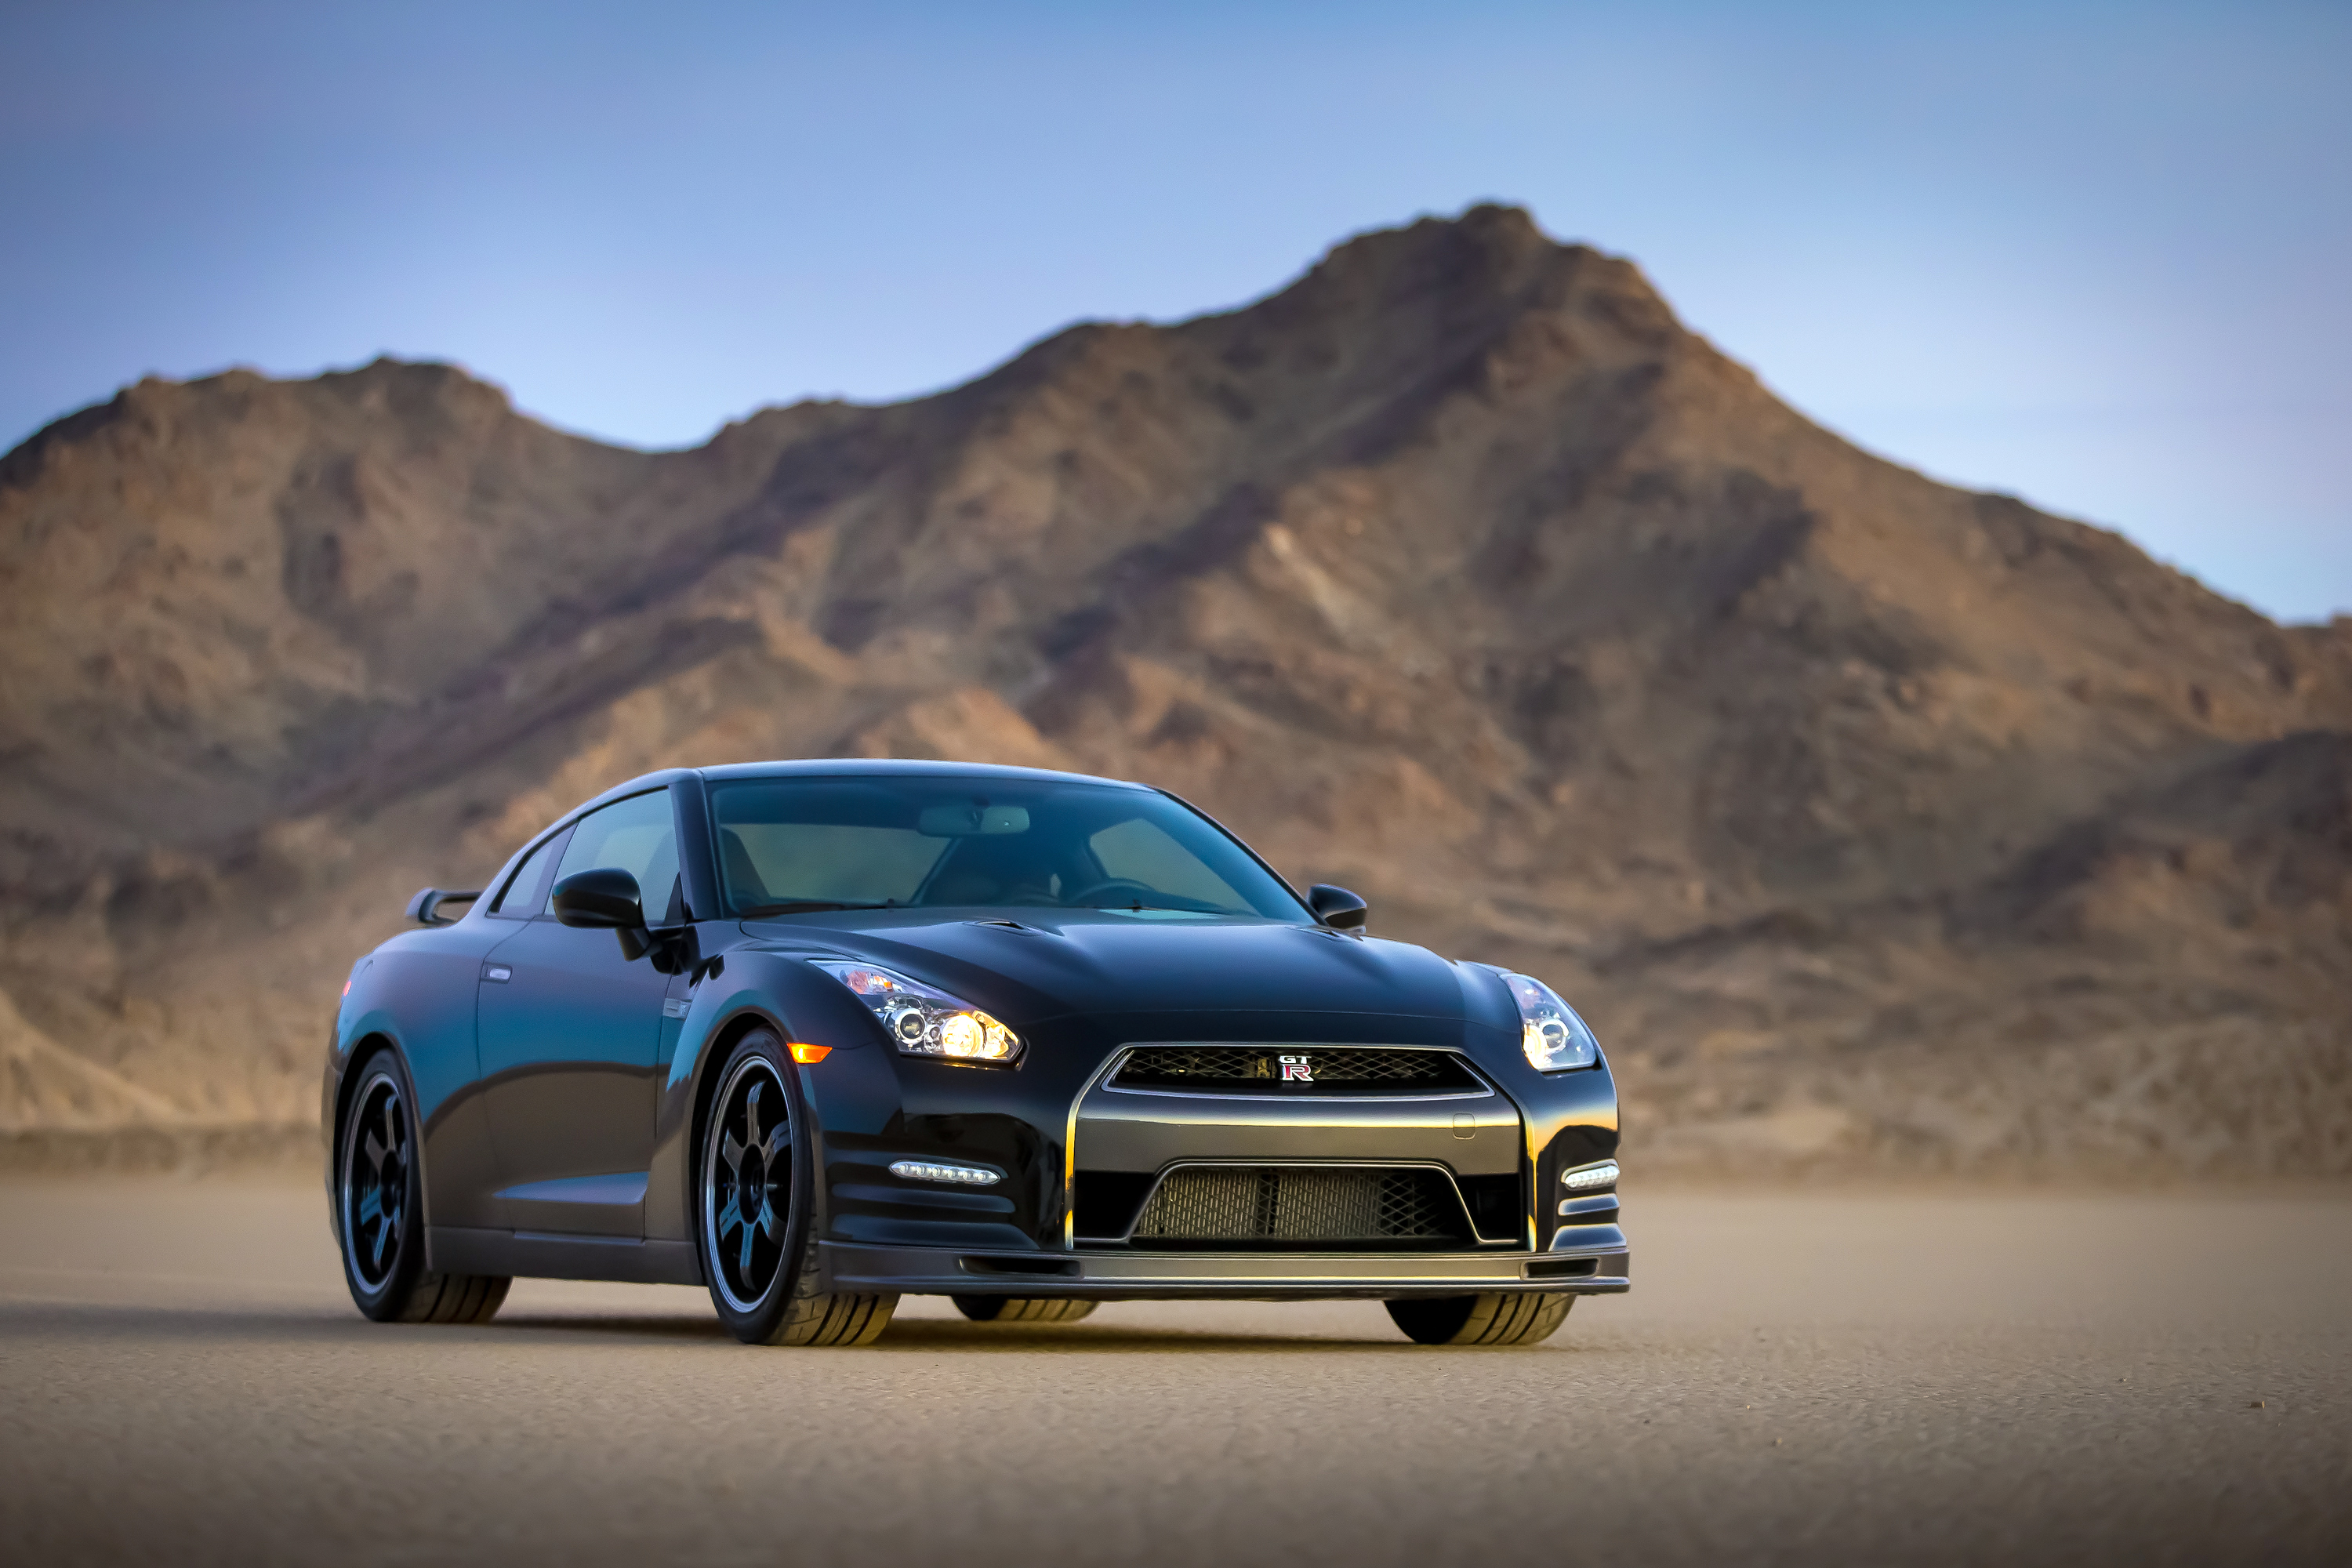 2014 Nissan GT-R – Review